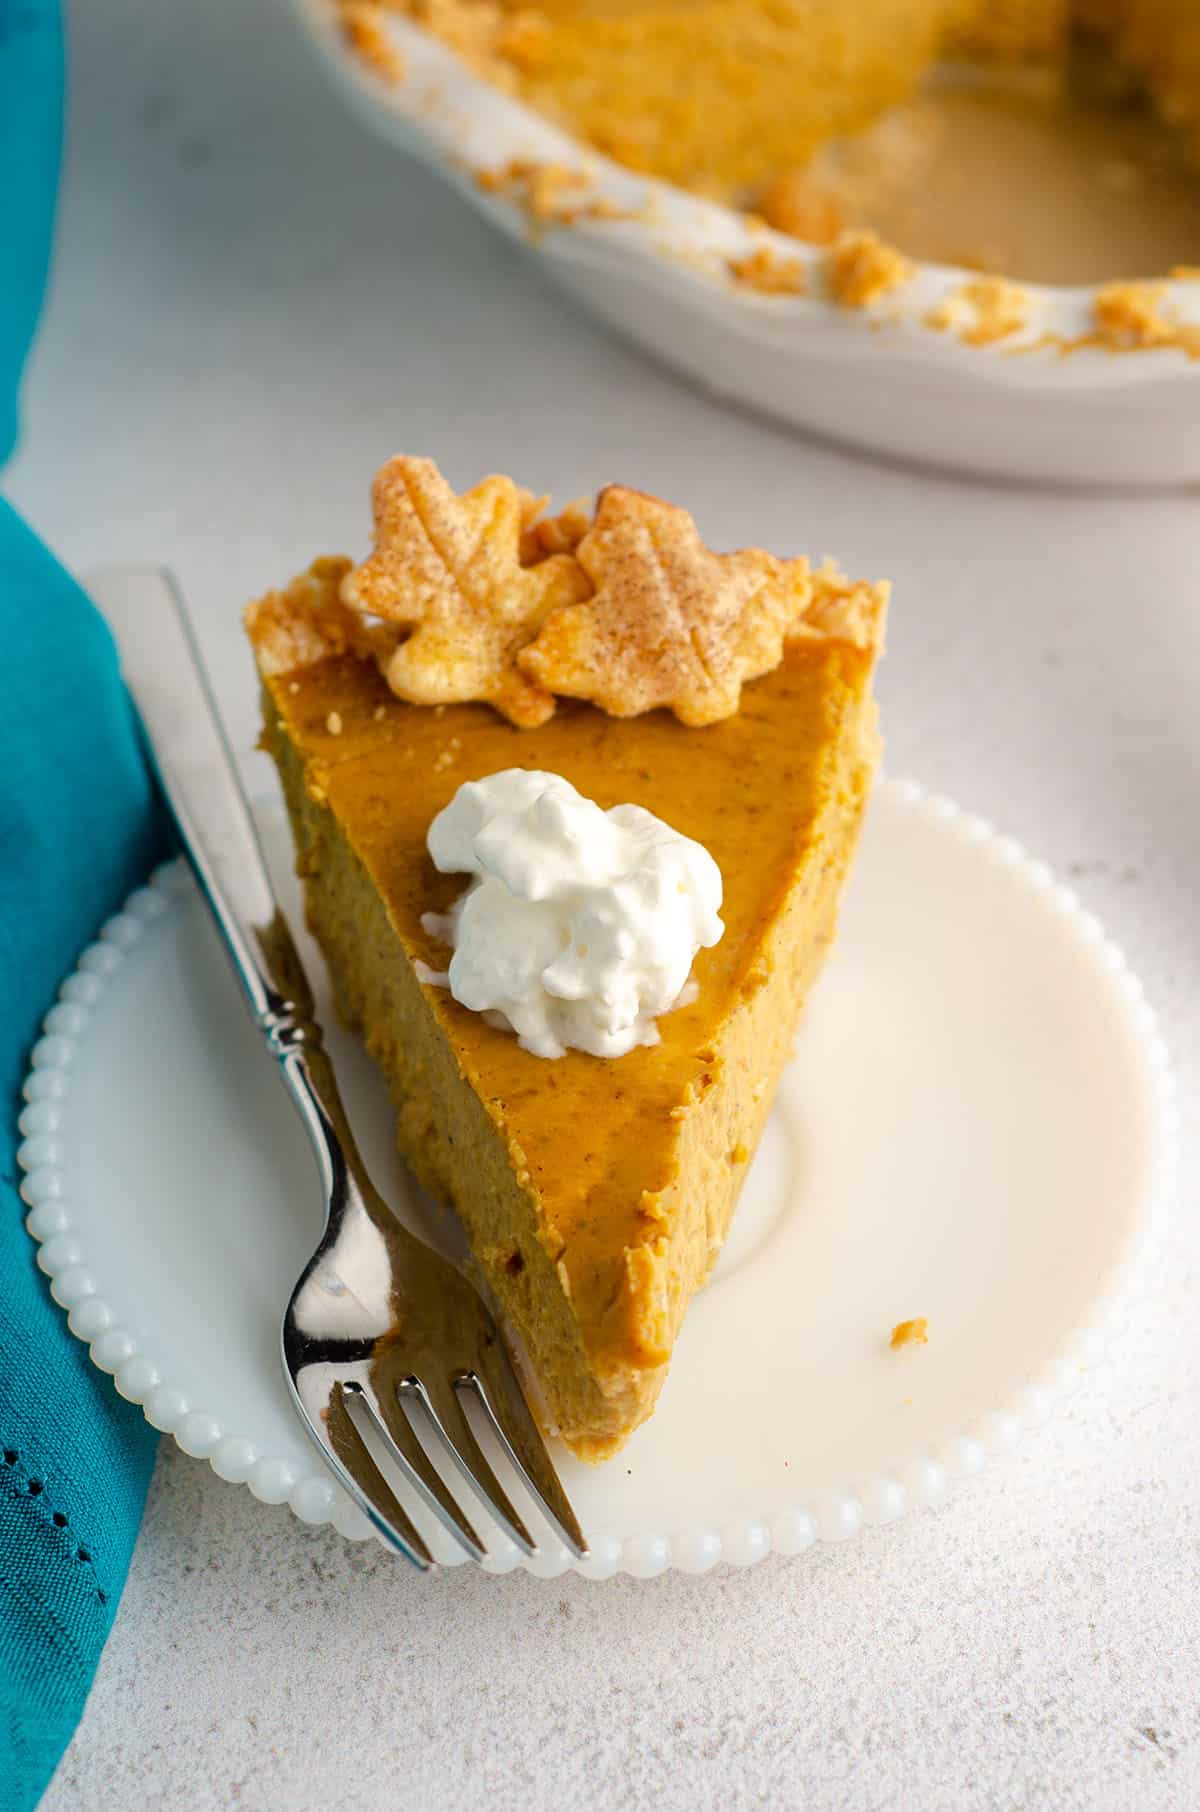 slice of pumpkin pie with a dollop of whipped cream on a plate with a fork